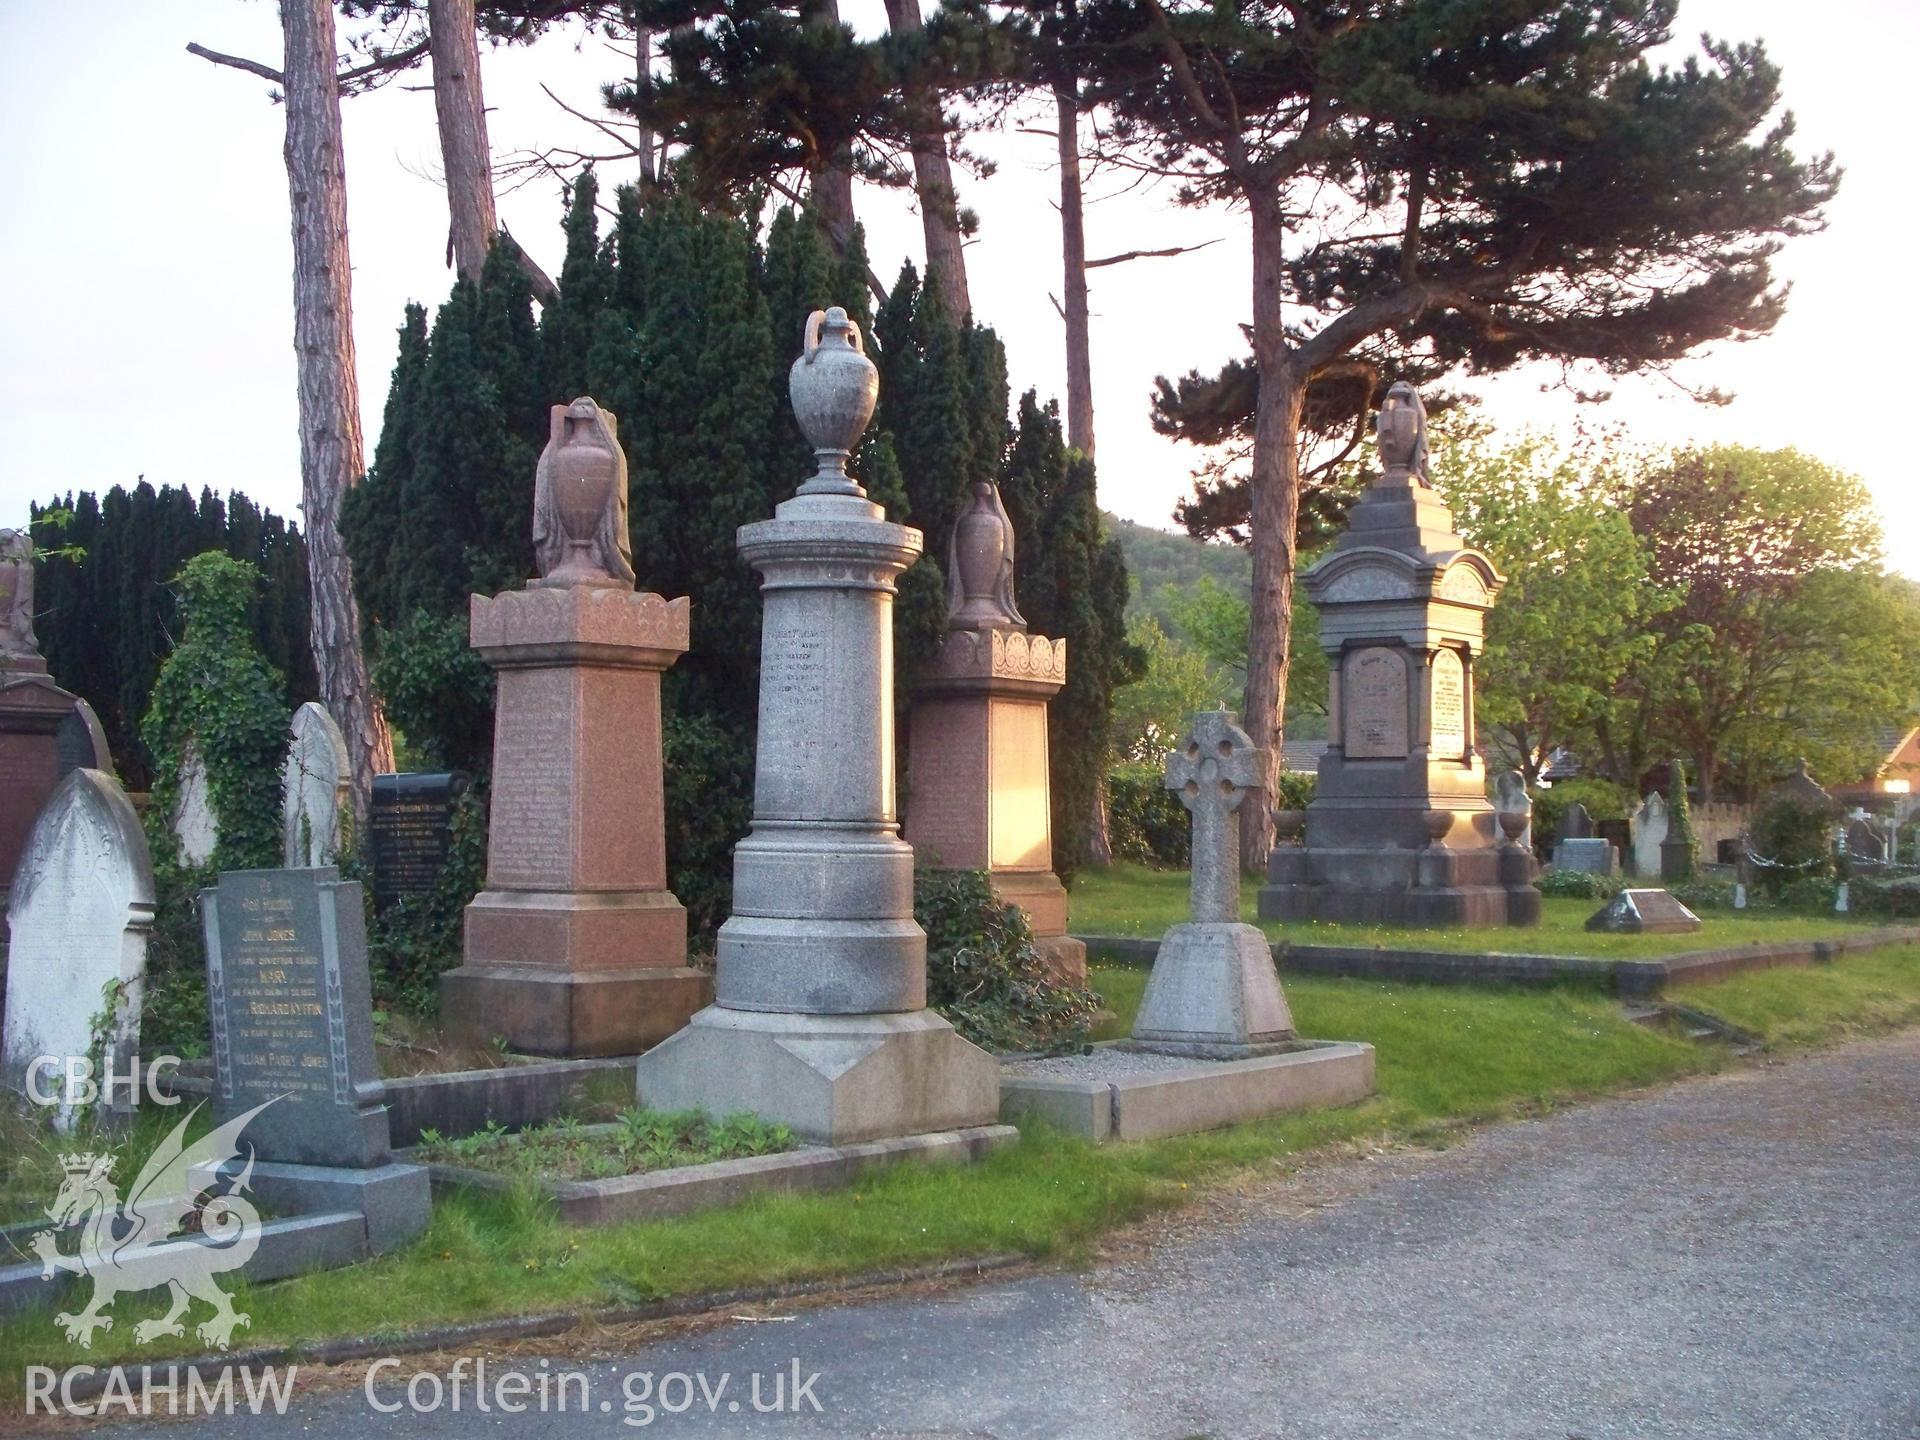 Monuments in graveyard.